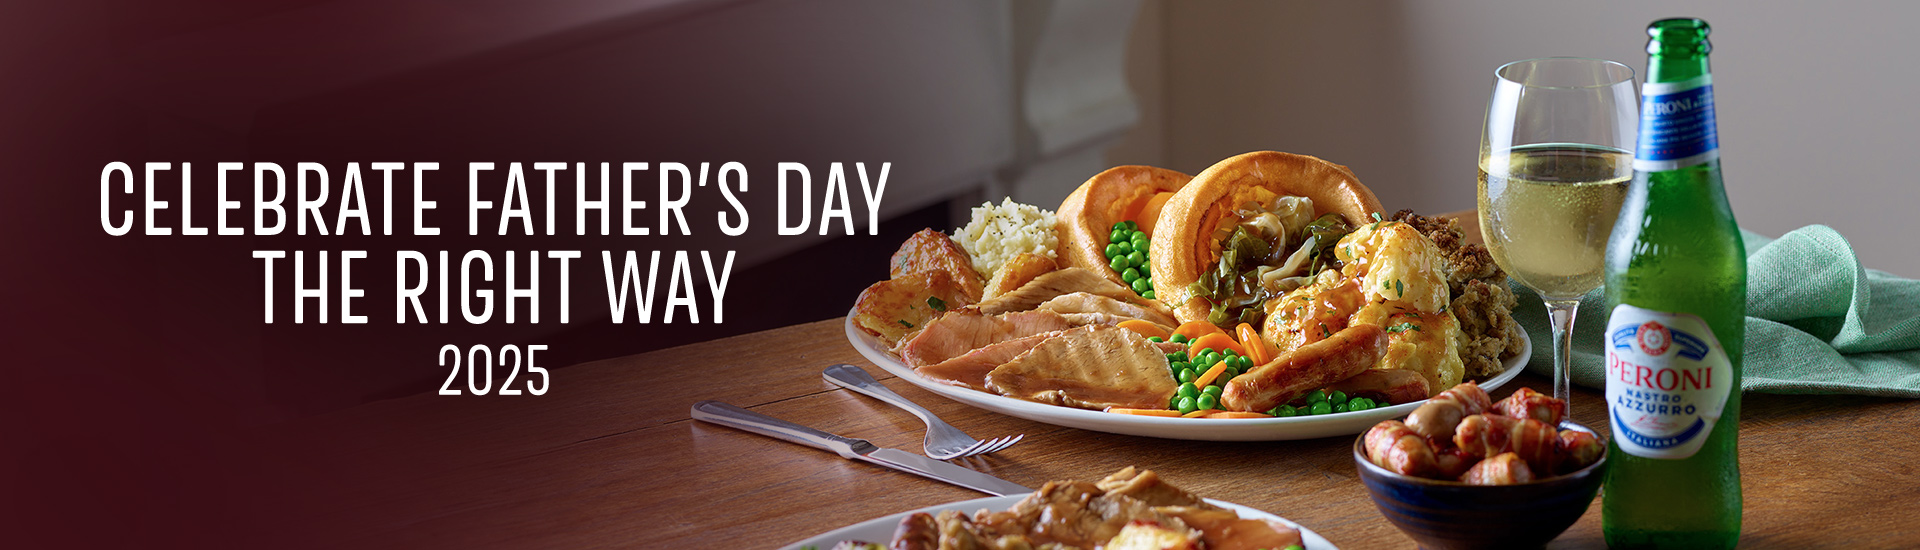 Father’s day carvery in Stevenage